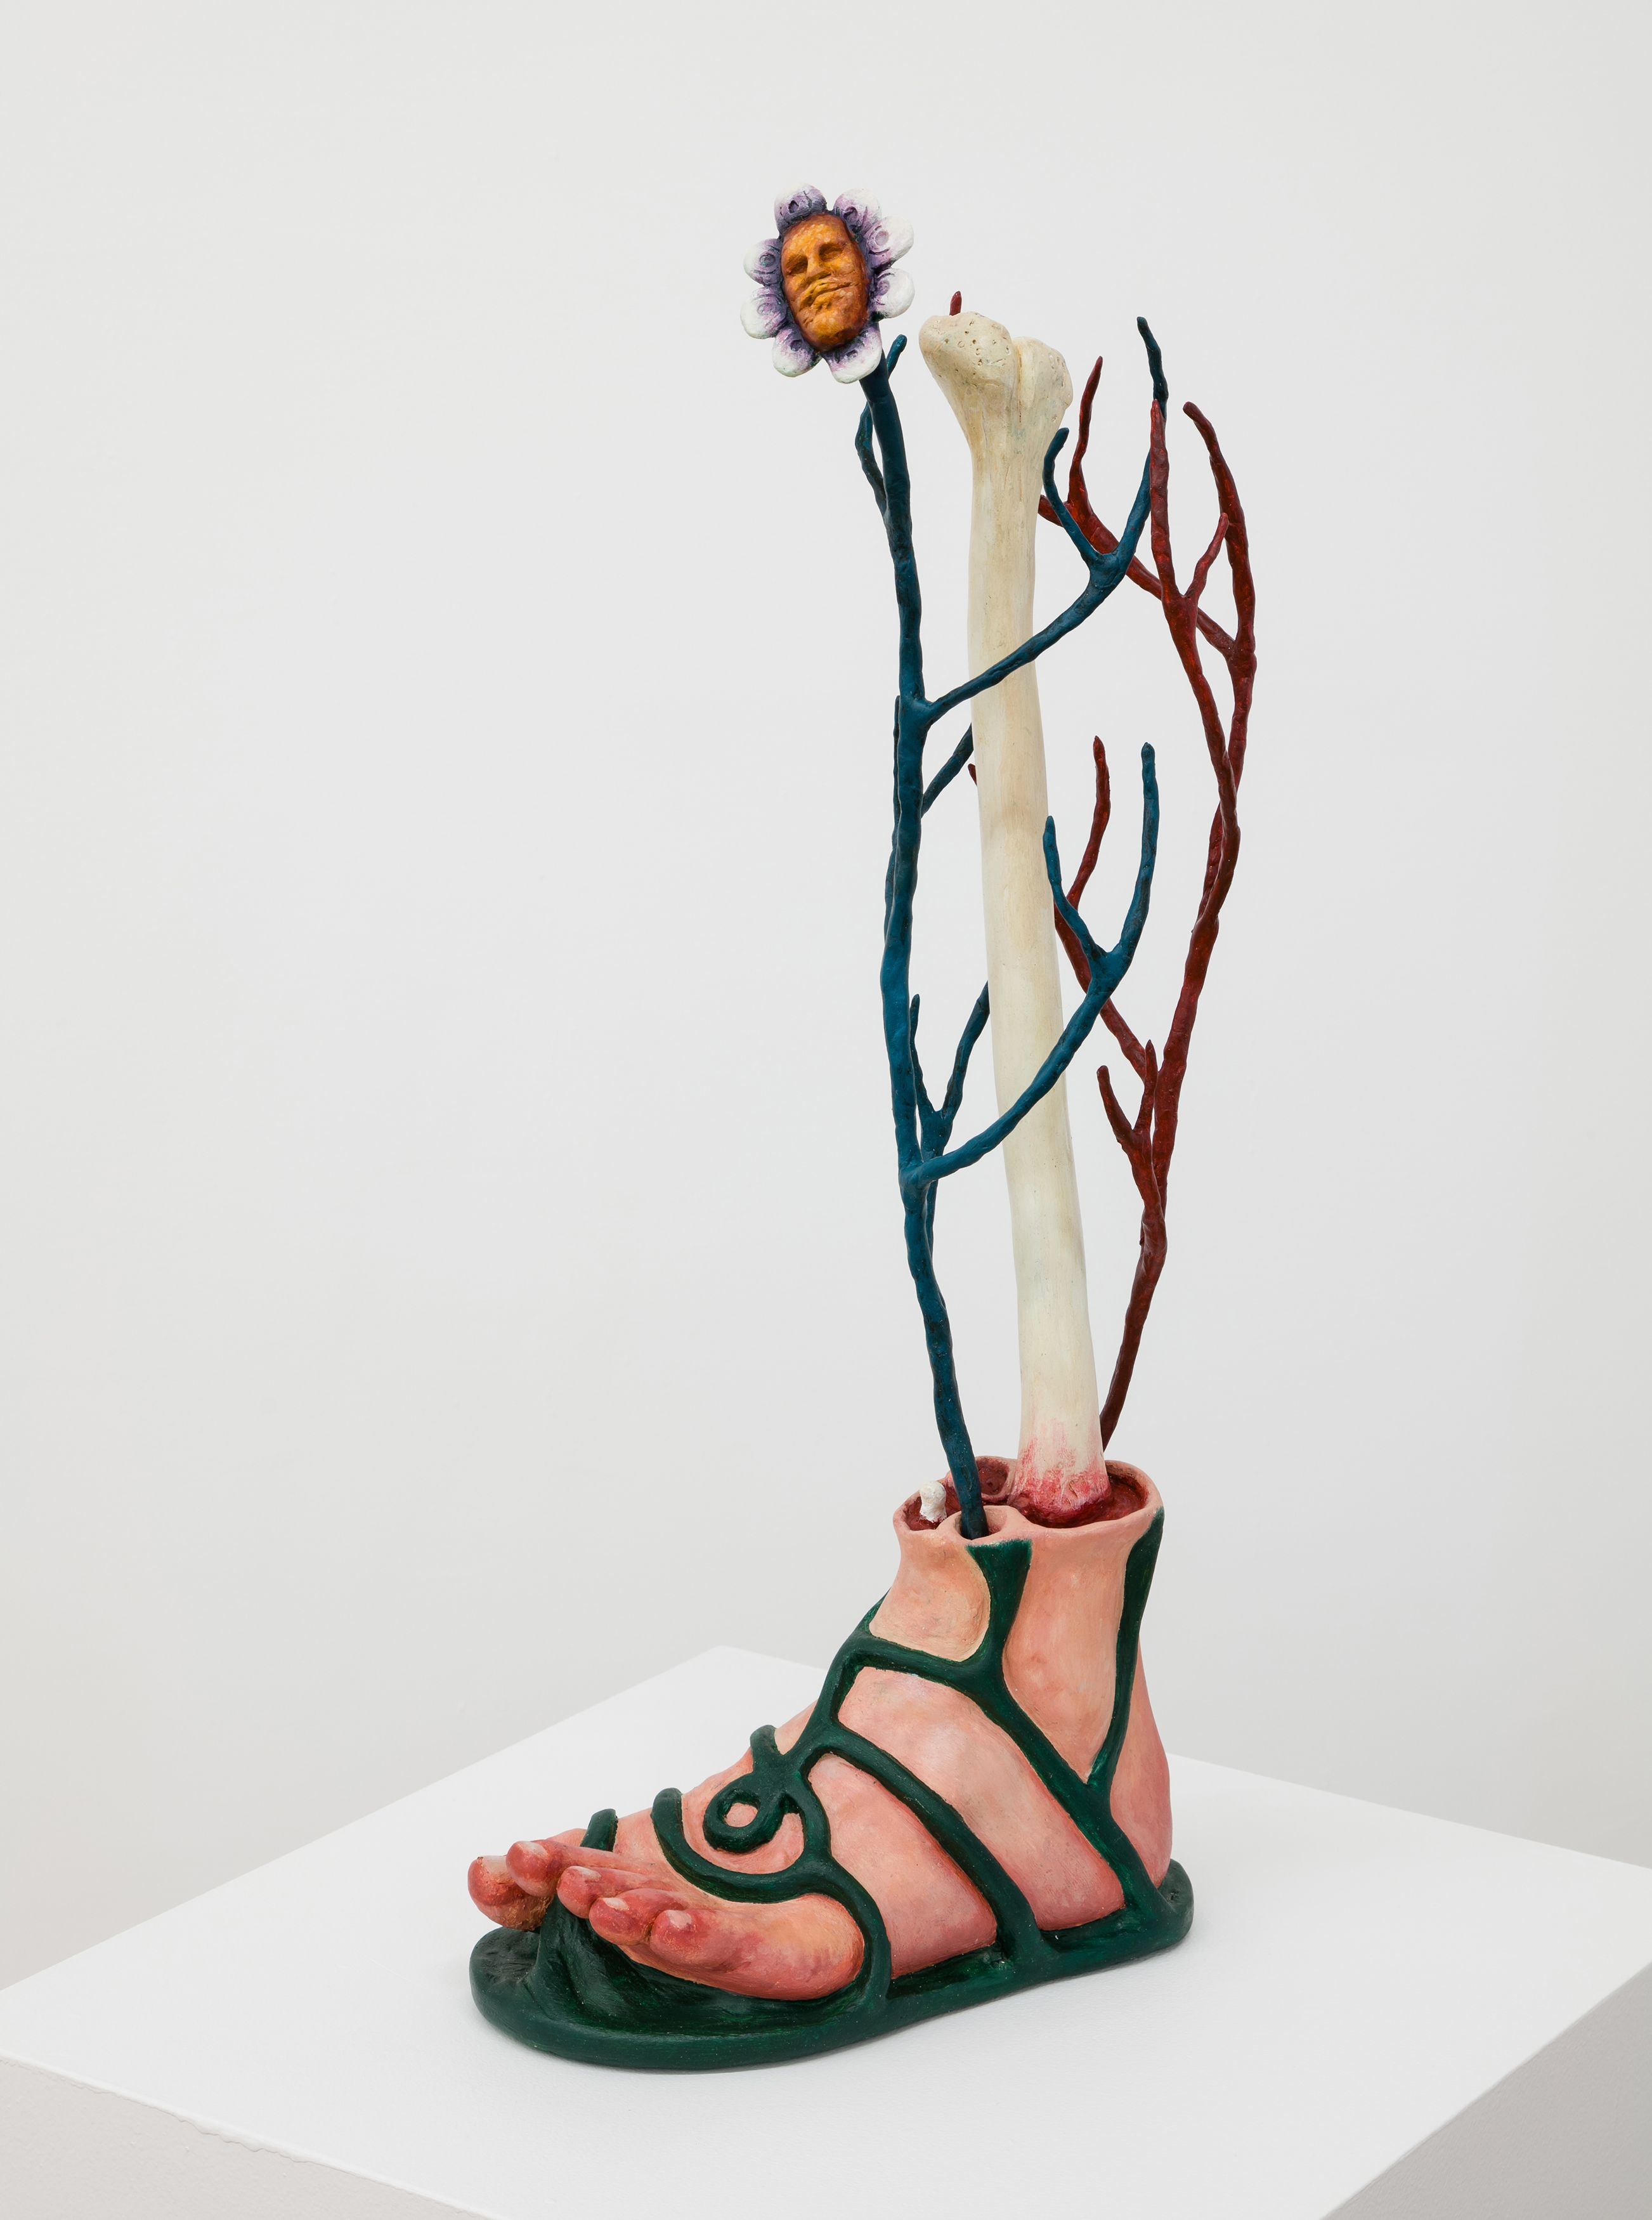 Justin Fitzpatrick, Vehicle no 2: Sing your own body electric, Walt, 2019, resin, epoxy clay, metal, 23 1/2 x 11 3/4 x 6 3/4 in. (60 x 30 x 17 cm)